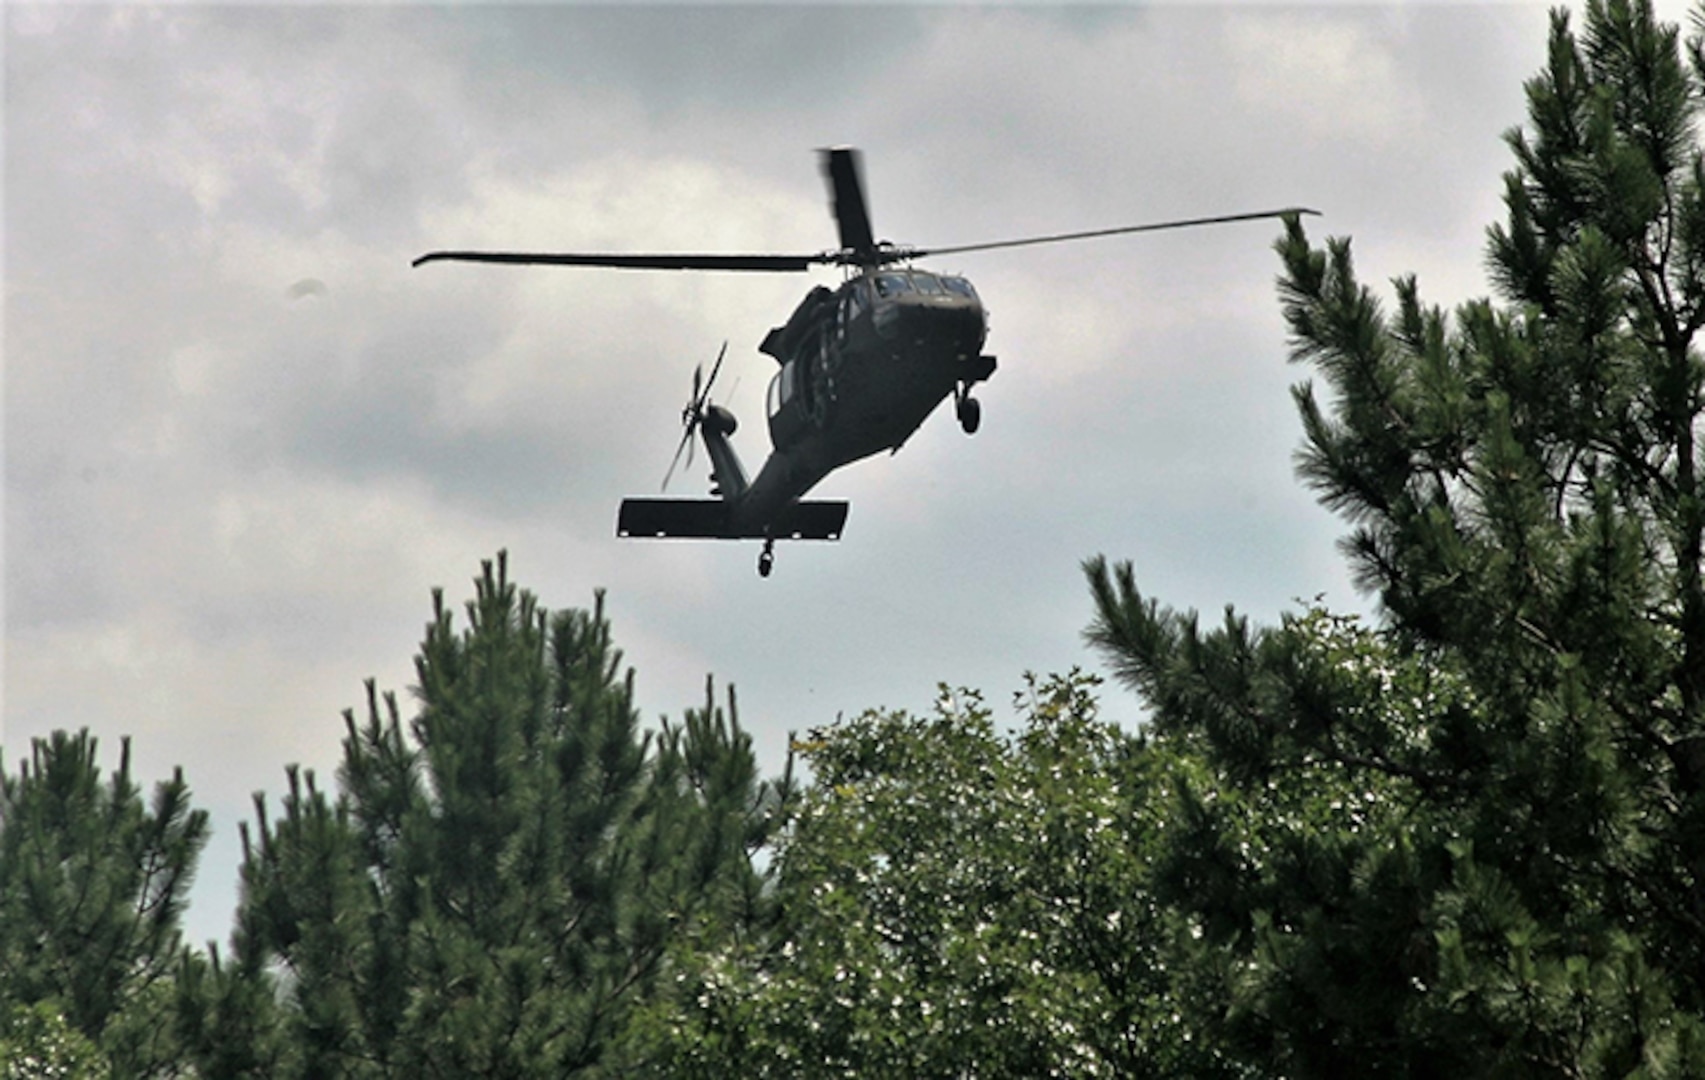 A UH-60 Black Hawk helicopter operated by a crew with the Wisconsin Army National Guard flies over the Combined Arms Collective Training Facility on June 28, 2018, at Fort McCoy, Wis. A Black Hawk crew rescued two men stranded in a marshland.